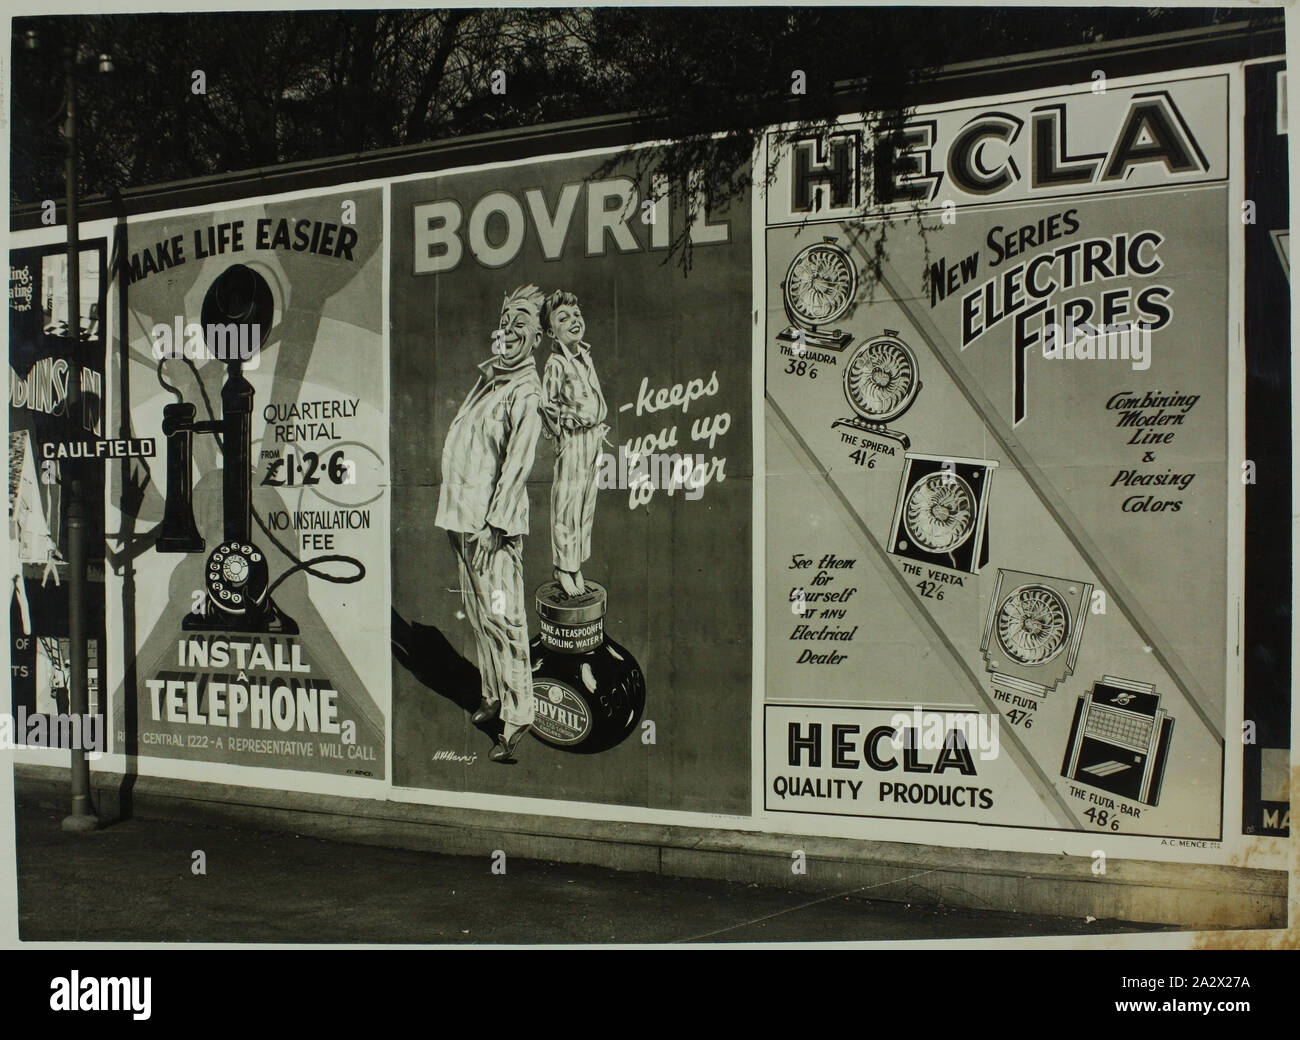 Photograph - Billboard Posters featuring Hecla Electrics Pty Ltd, 'Electric Fires', Caulfield, circa 1940, Black and white photograph of billboard posters on the platform at Caulfield Railway Station in Melbourne, circa 1940. The posters are advertising telephone installation, Bovril, and Hecla Electrics Pty Ltd new series of 'electric fires'. The models of electric fires featured are 'Quadra', 'Sphera', 'Verta', 'Fluta' and the 'Fluta-Bar', and prices are included in the poster. The designs mark Stock Photo